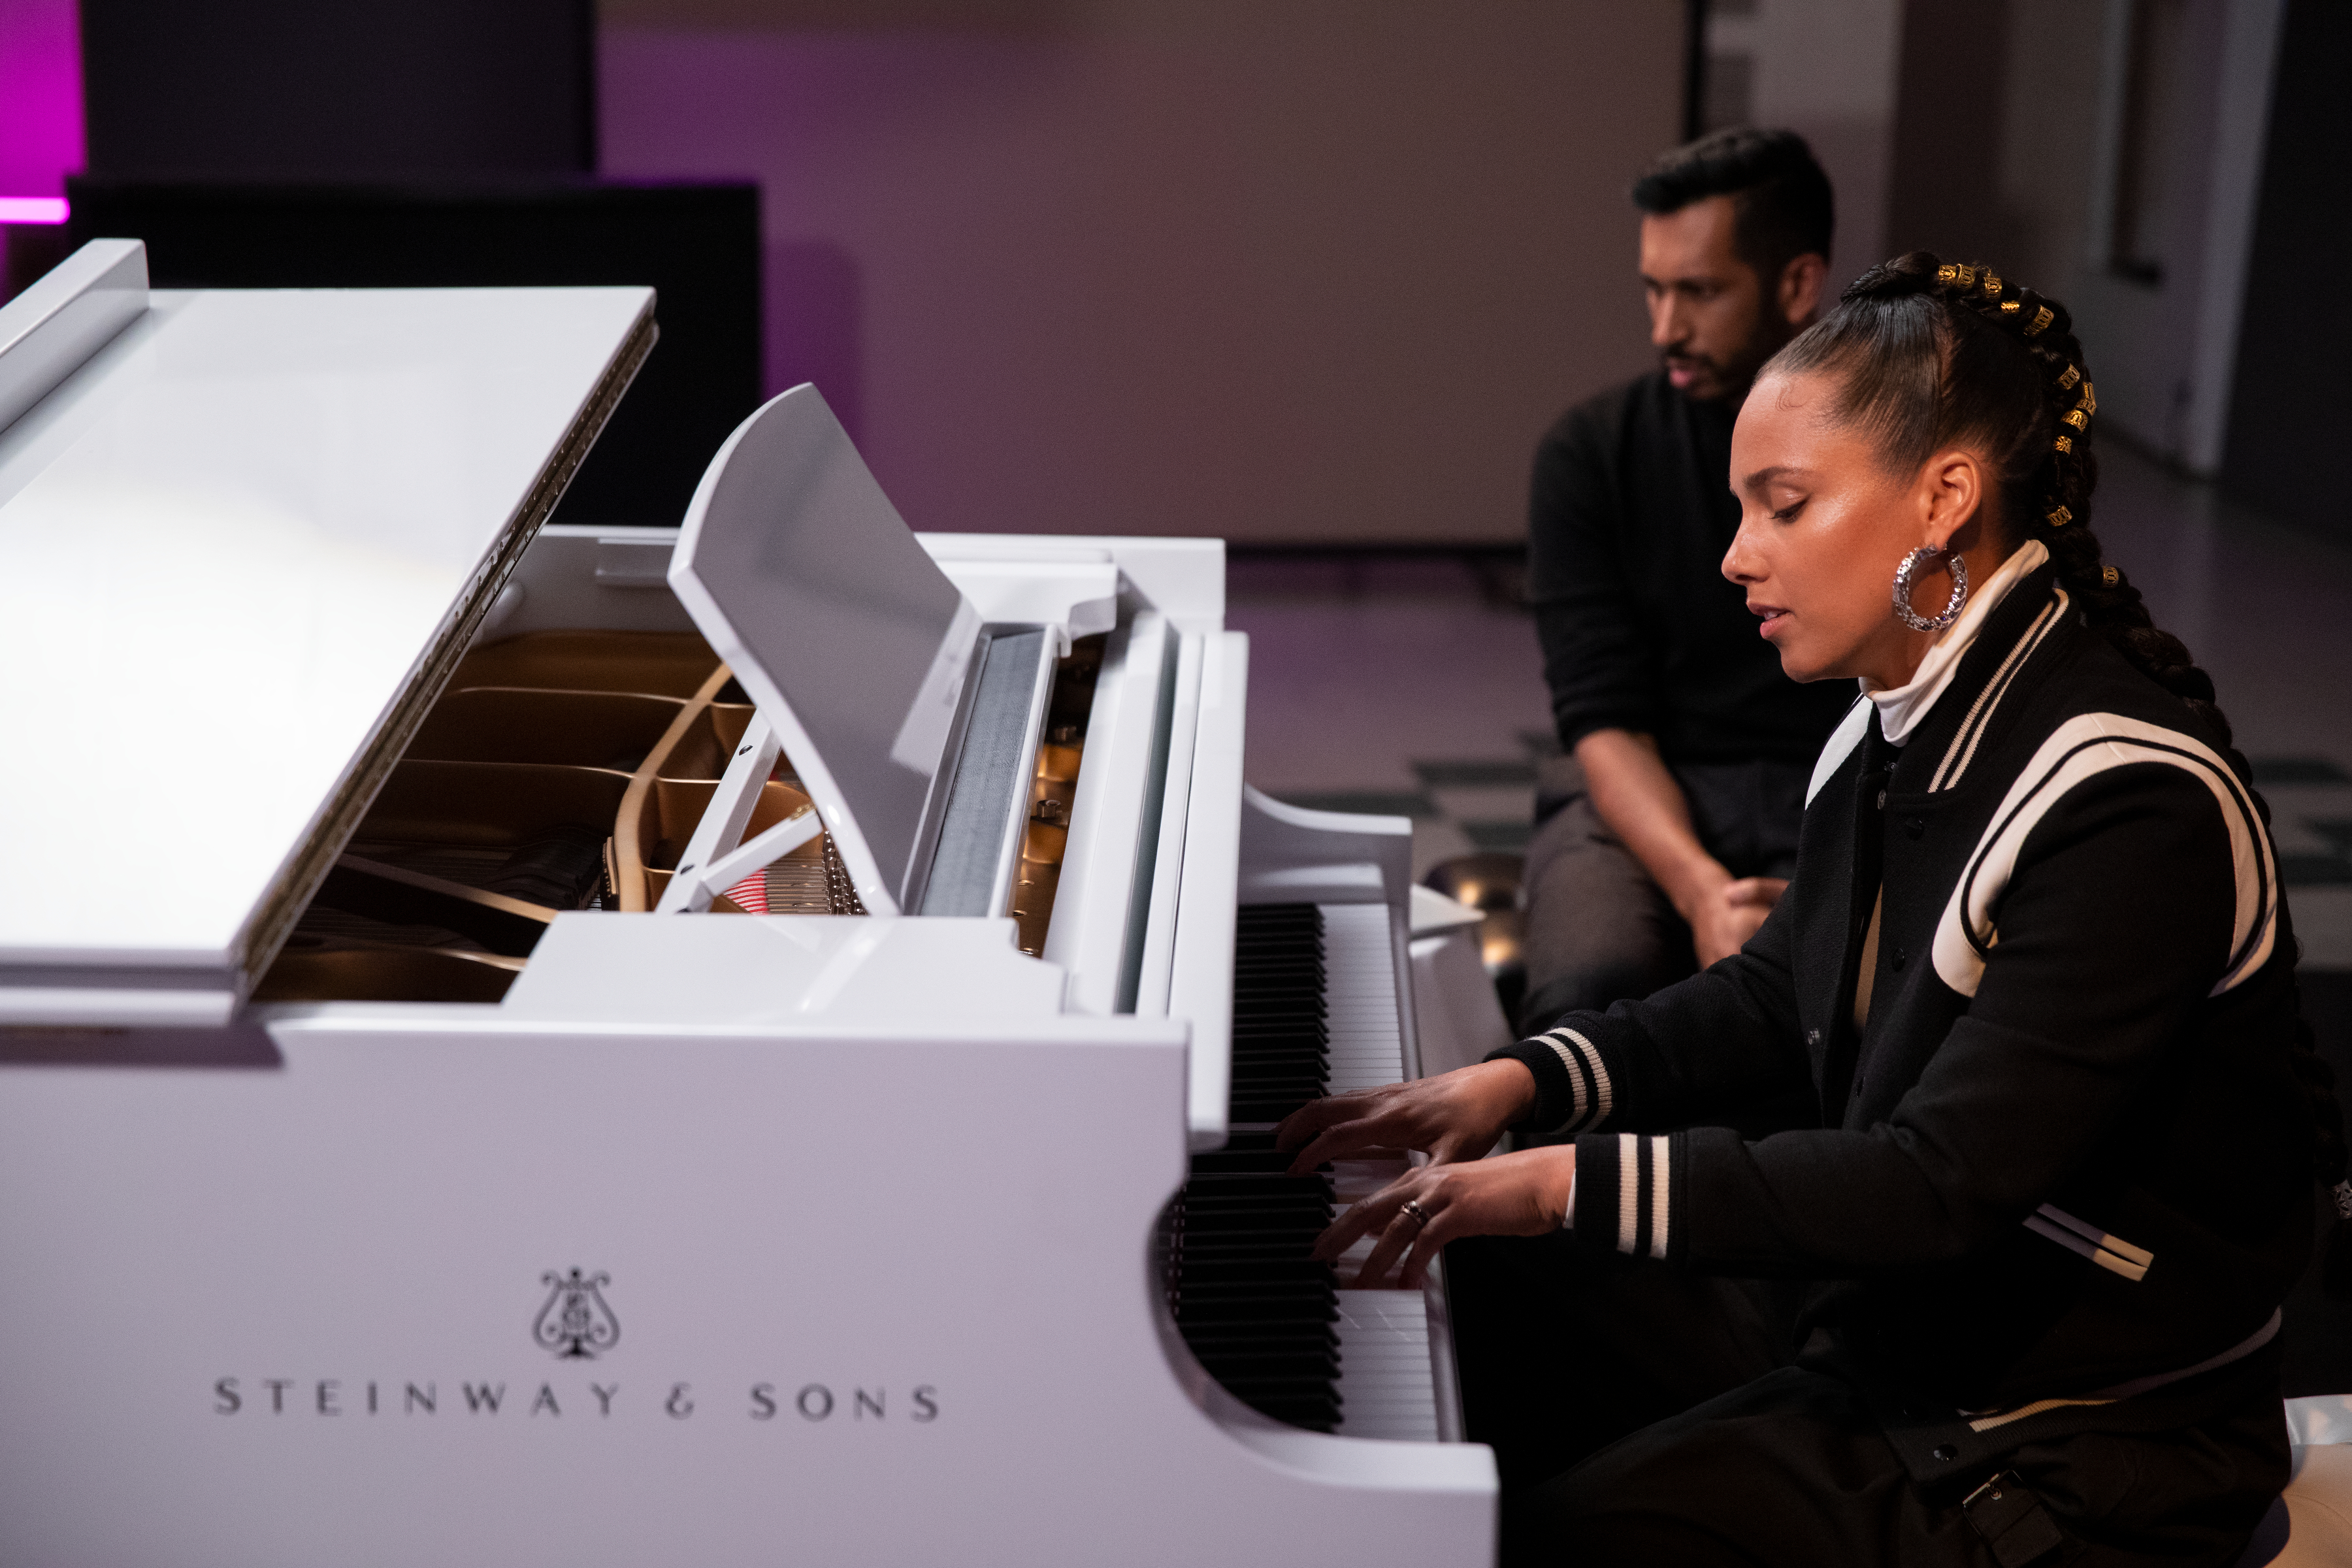 Alicia Keys and Hrishikesh Hirway in the Netflix series "Song Exploder," adapted from Hirway's podcast of the same name.